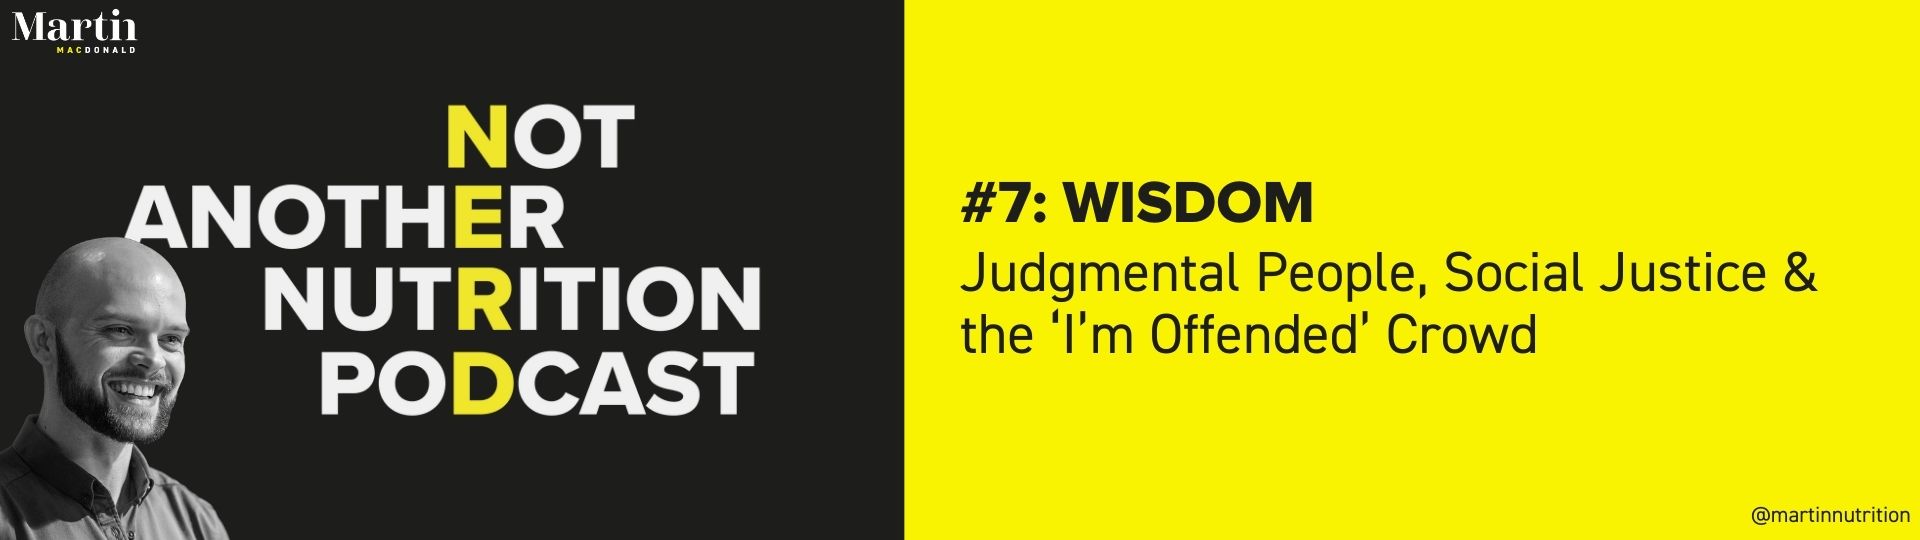 Judgmental People, Social Justice & the ‘I’m Offended’ Crowd